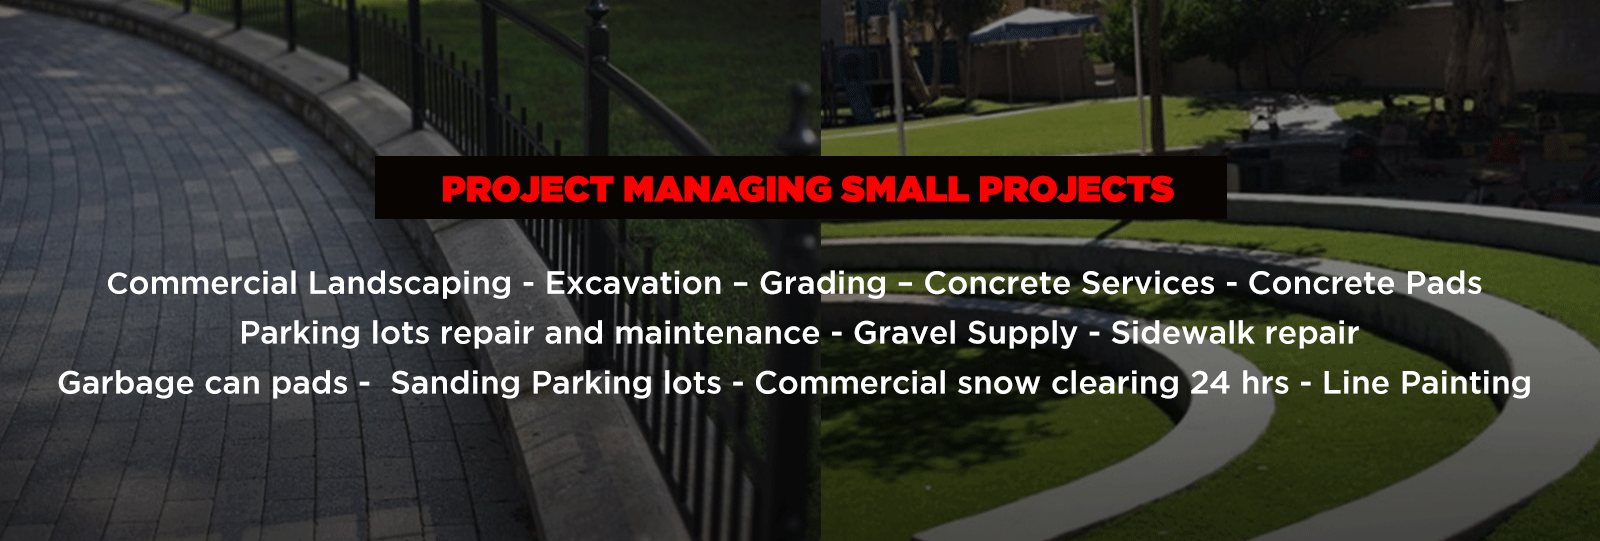 Project Managing Small Projects